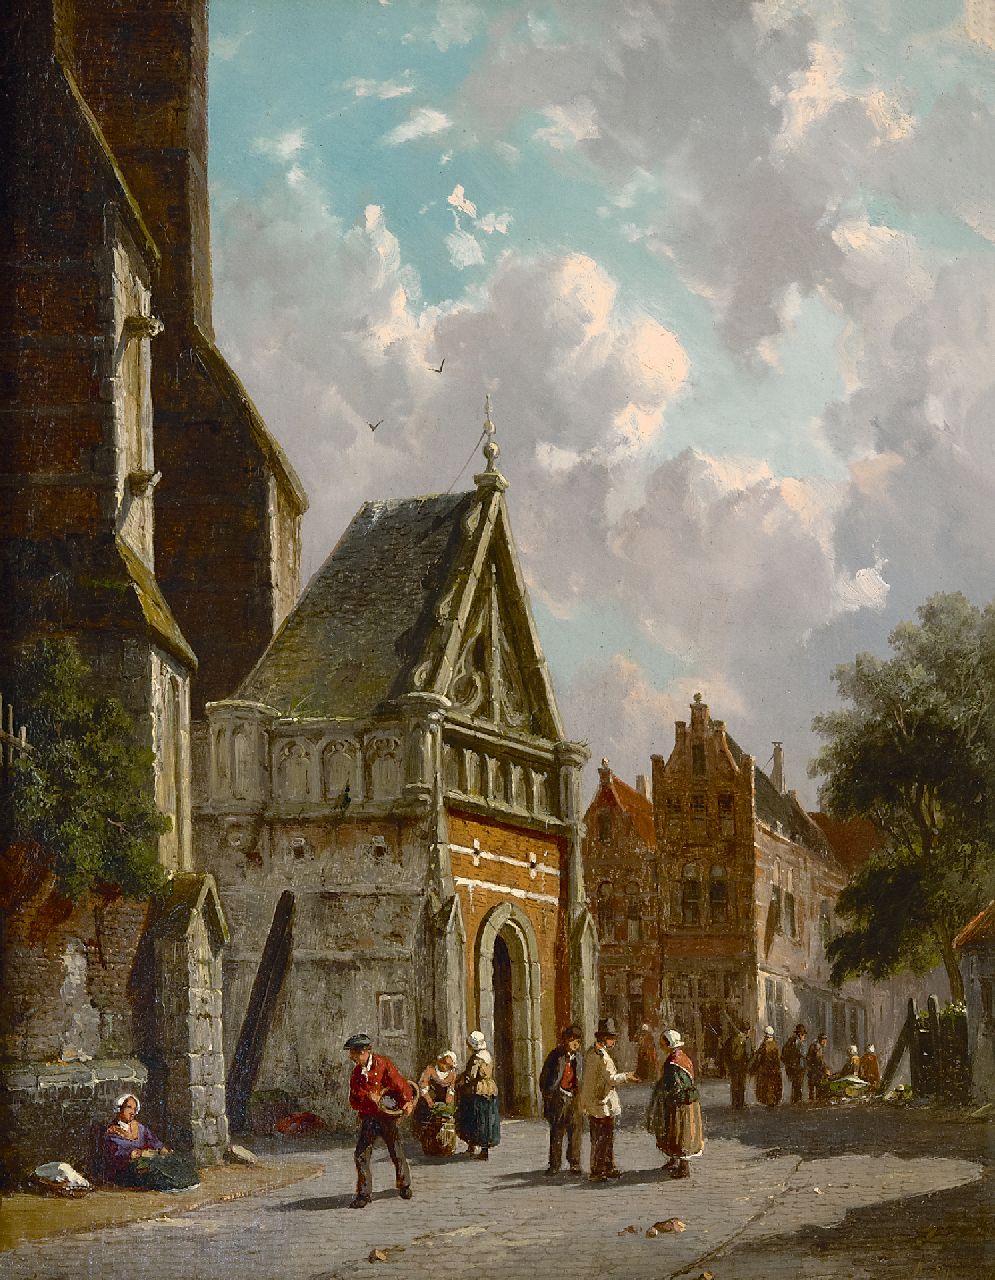 Eversen A.  | Adrianus Eversen | Paintings offered for sale | Behind the church, oil on panel 34.8 x 27.0 cm, signed l.r.